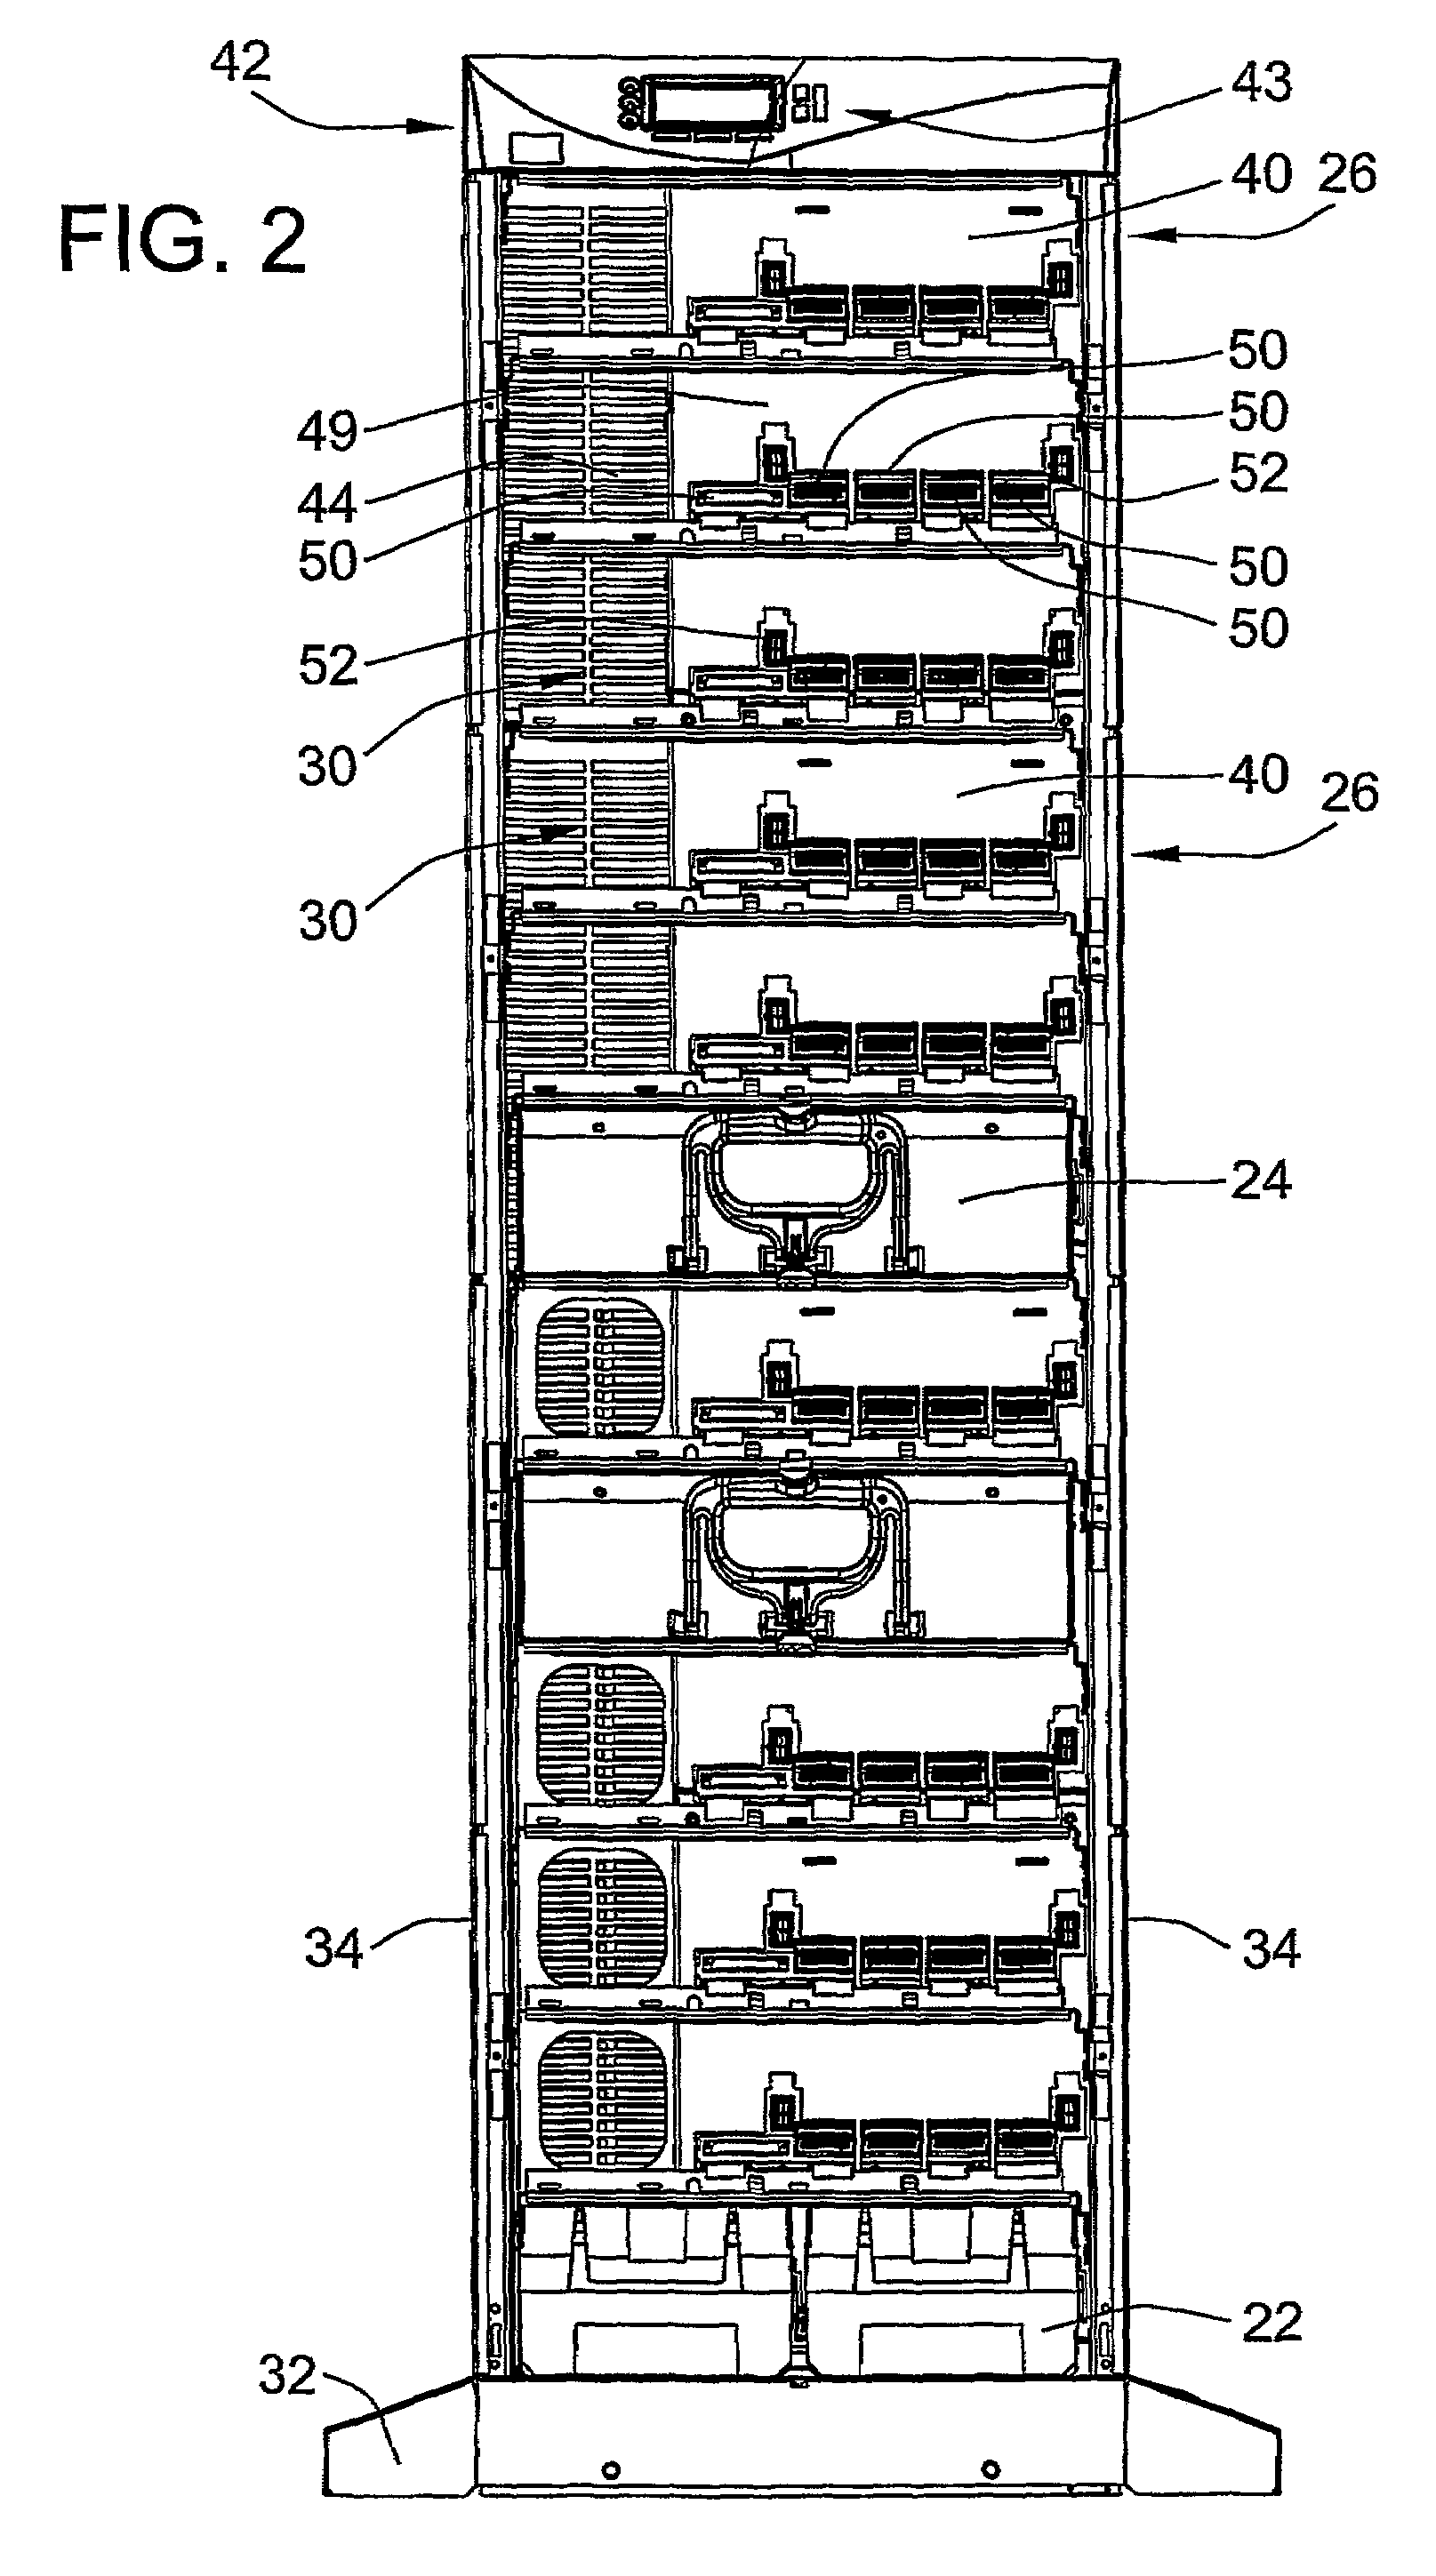 System for detecting defective battery packs